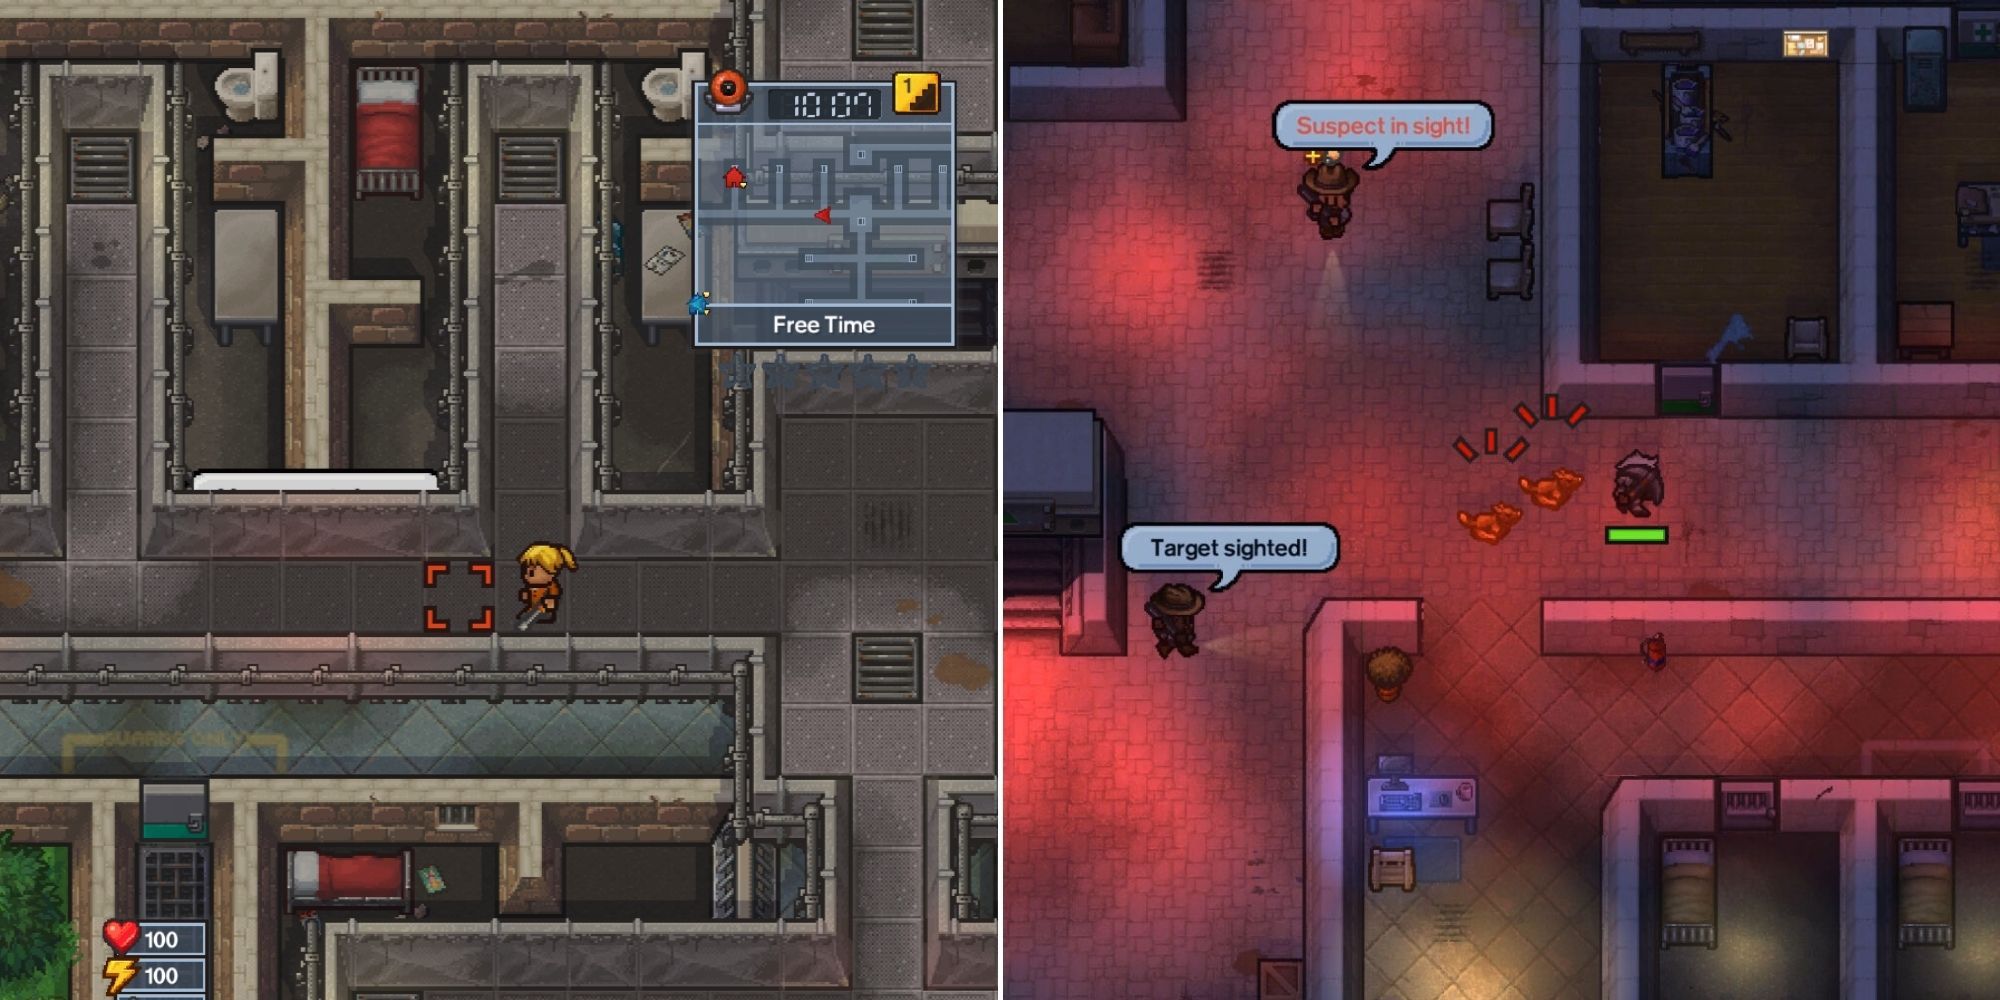 The Escapists 2 - Player holding a screwdriver during Free Time - Player chased by guards and dogs